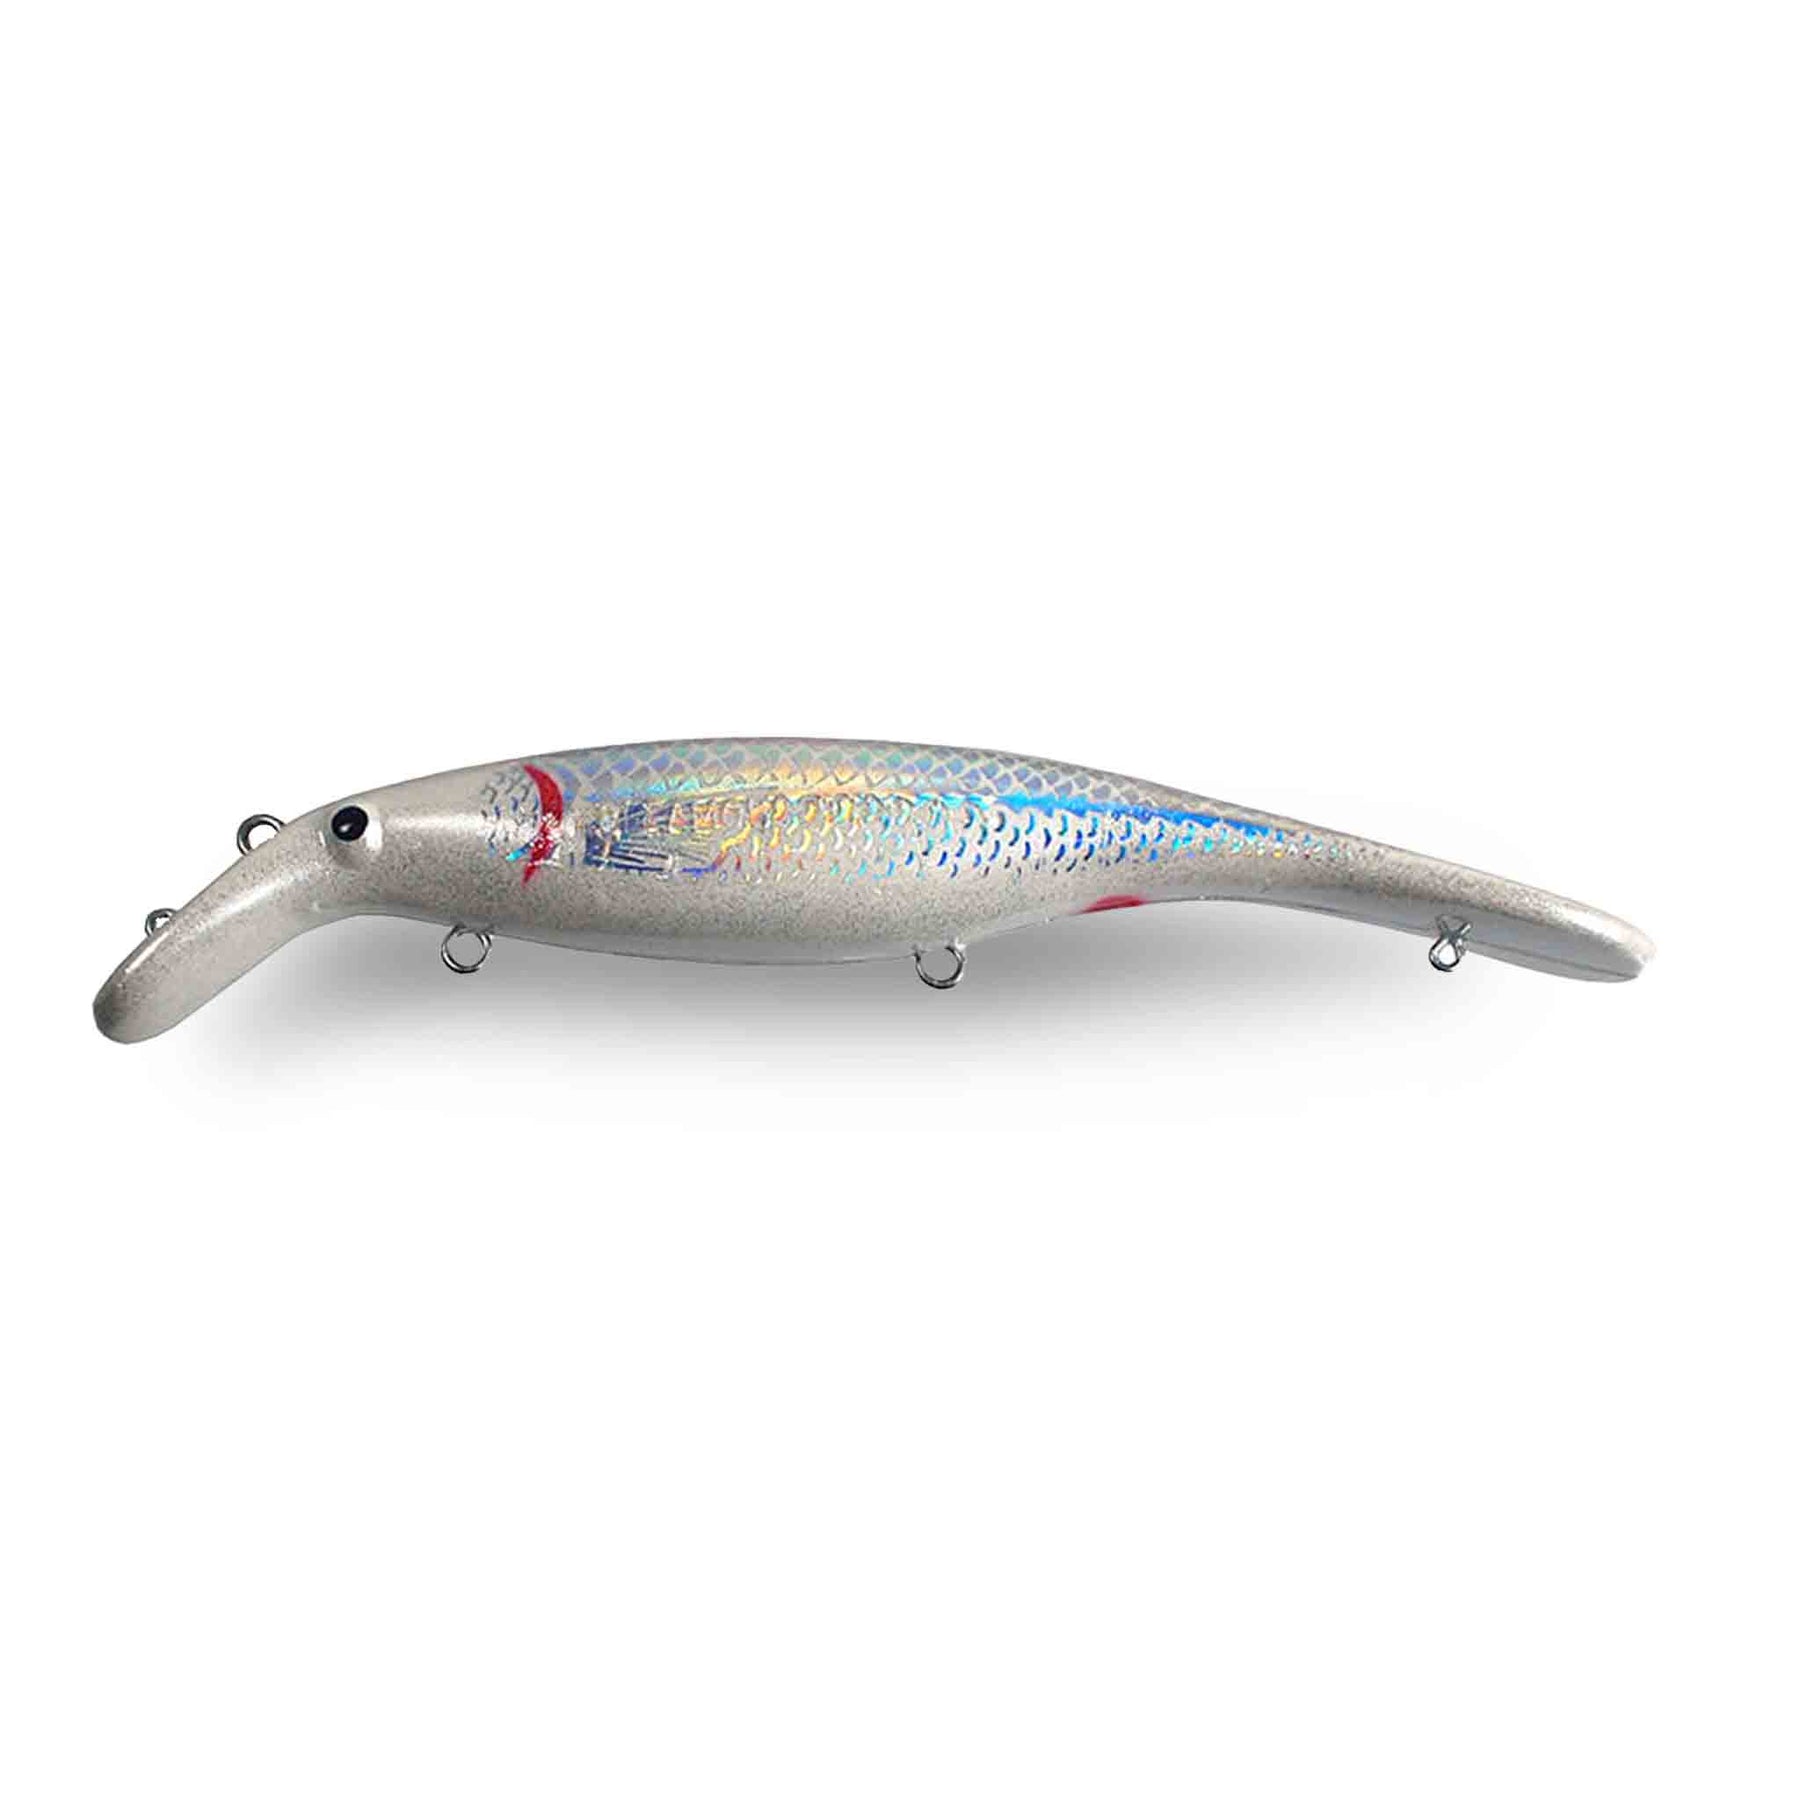 The BELIVER Drifter Tackle Jointed 8 Musky Muskie Crankbait Lure